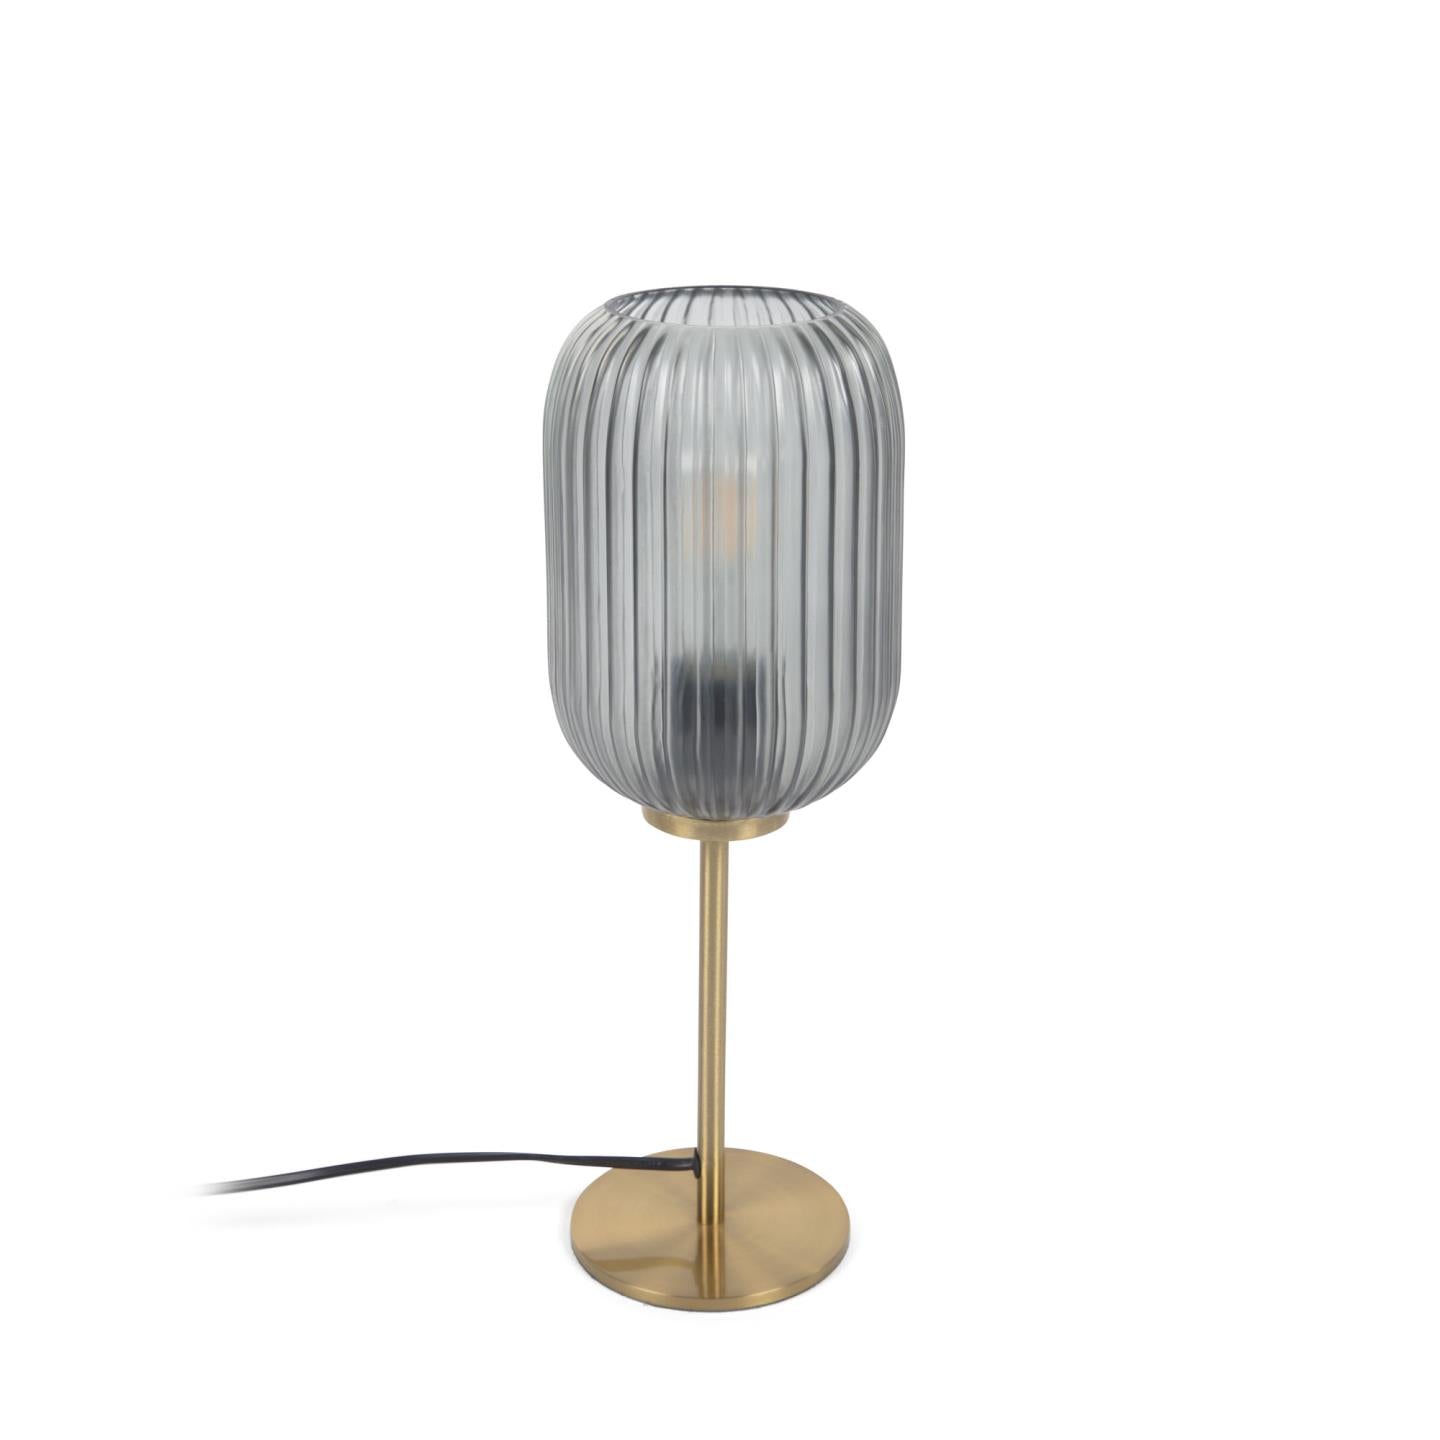 Hestia table lamp in metal with brass and grey glass finish